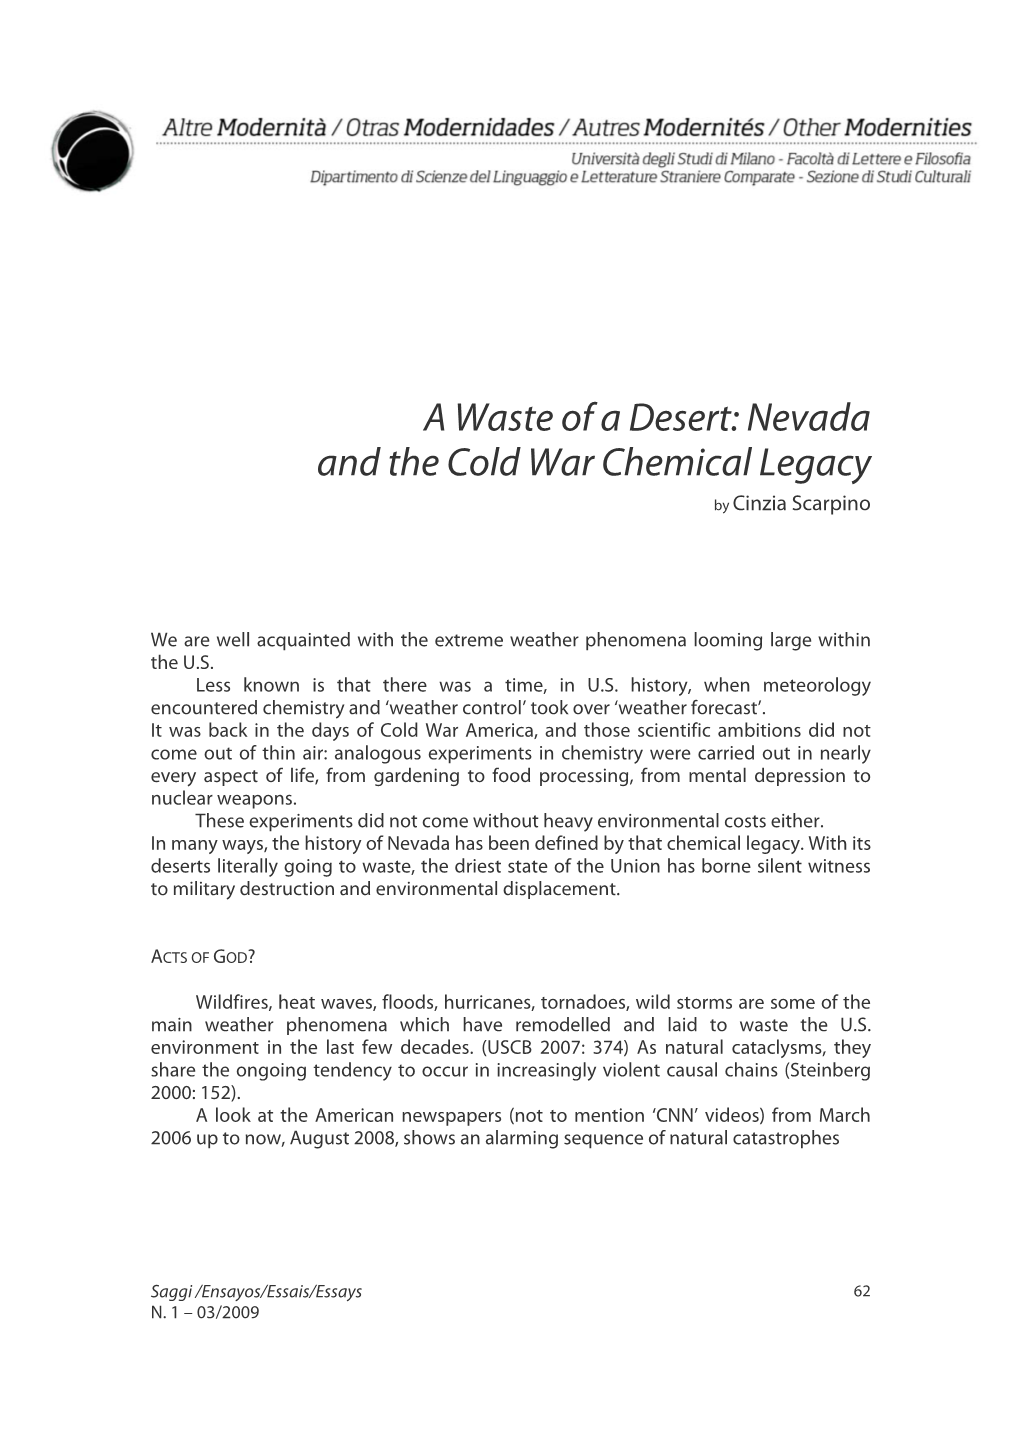 A Waste of a Desert: Nevada and the Cold War Chemical Legacy